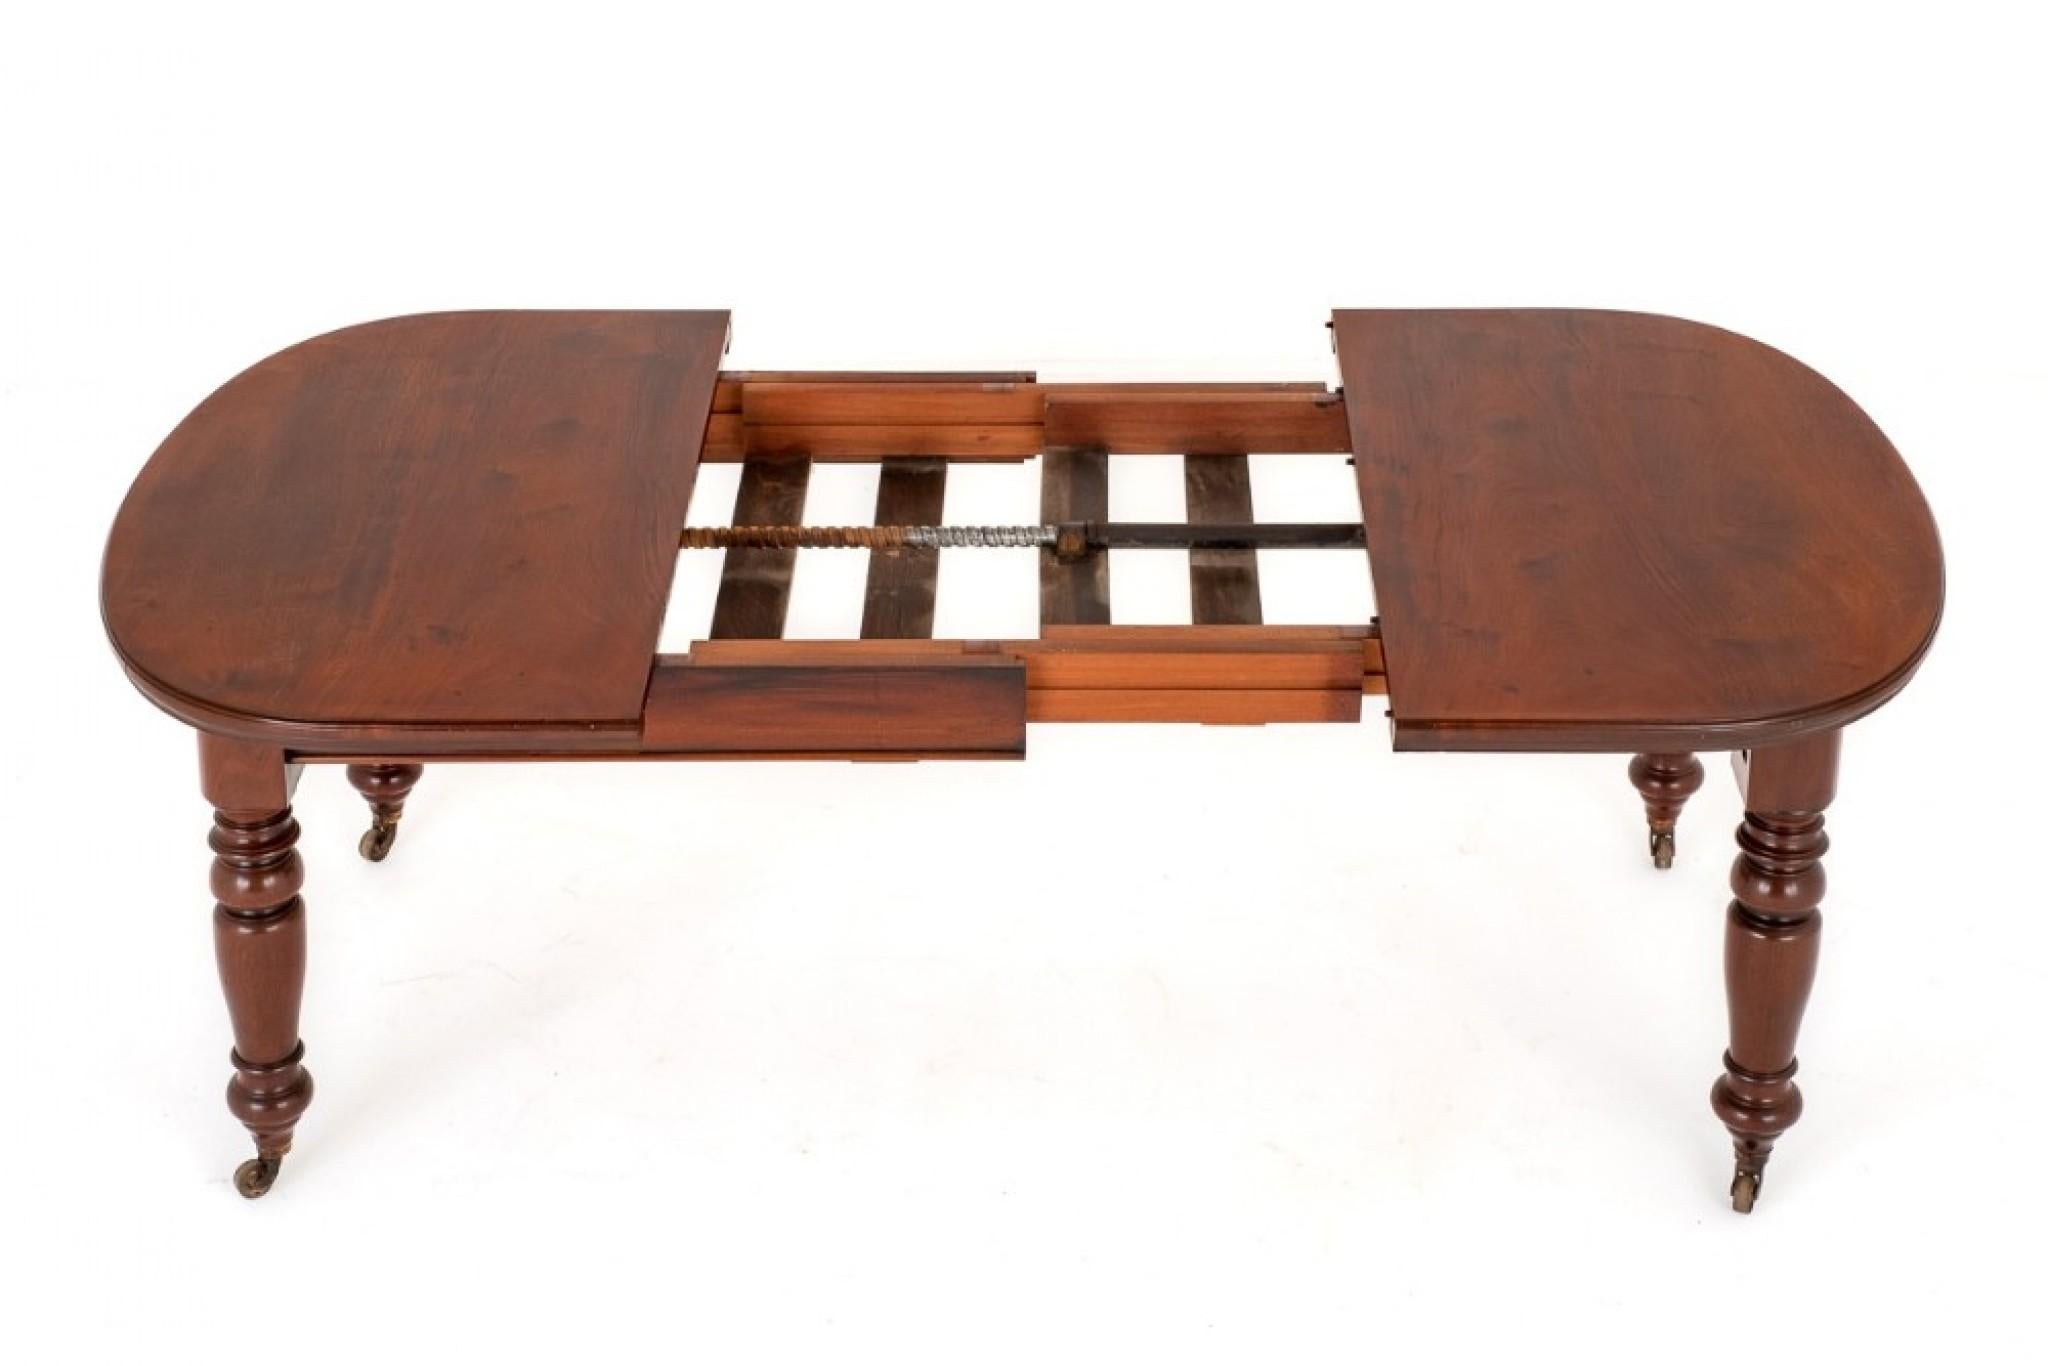 Victorian mahogany 2 leaf extending dining table.
This table is raised upon turned legs with brass castors.
The top of the table being of a bow end form.
circa 1880
The table extends by way of a wind out telescopic mechanism to accept 2